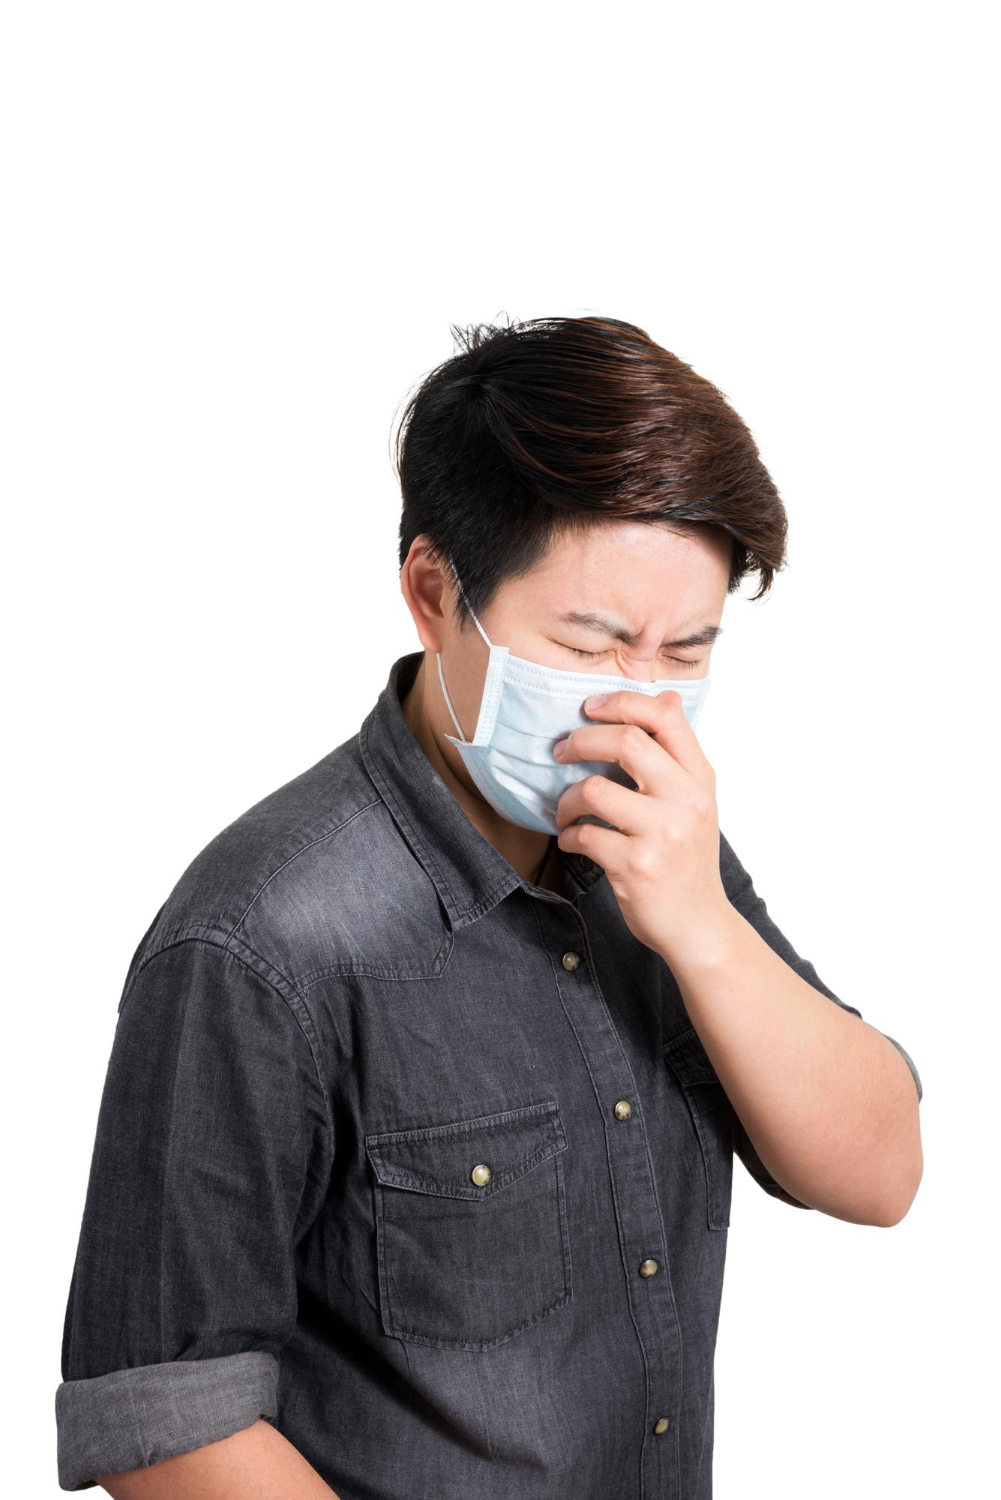 asian-man-was-cough-wearing-protective-mask-i